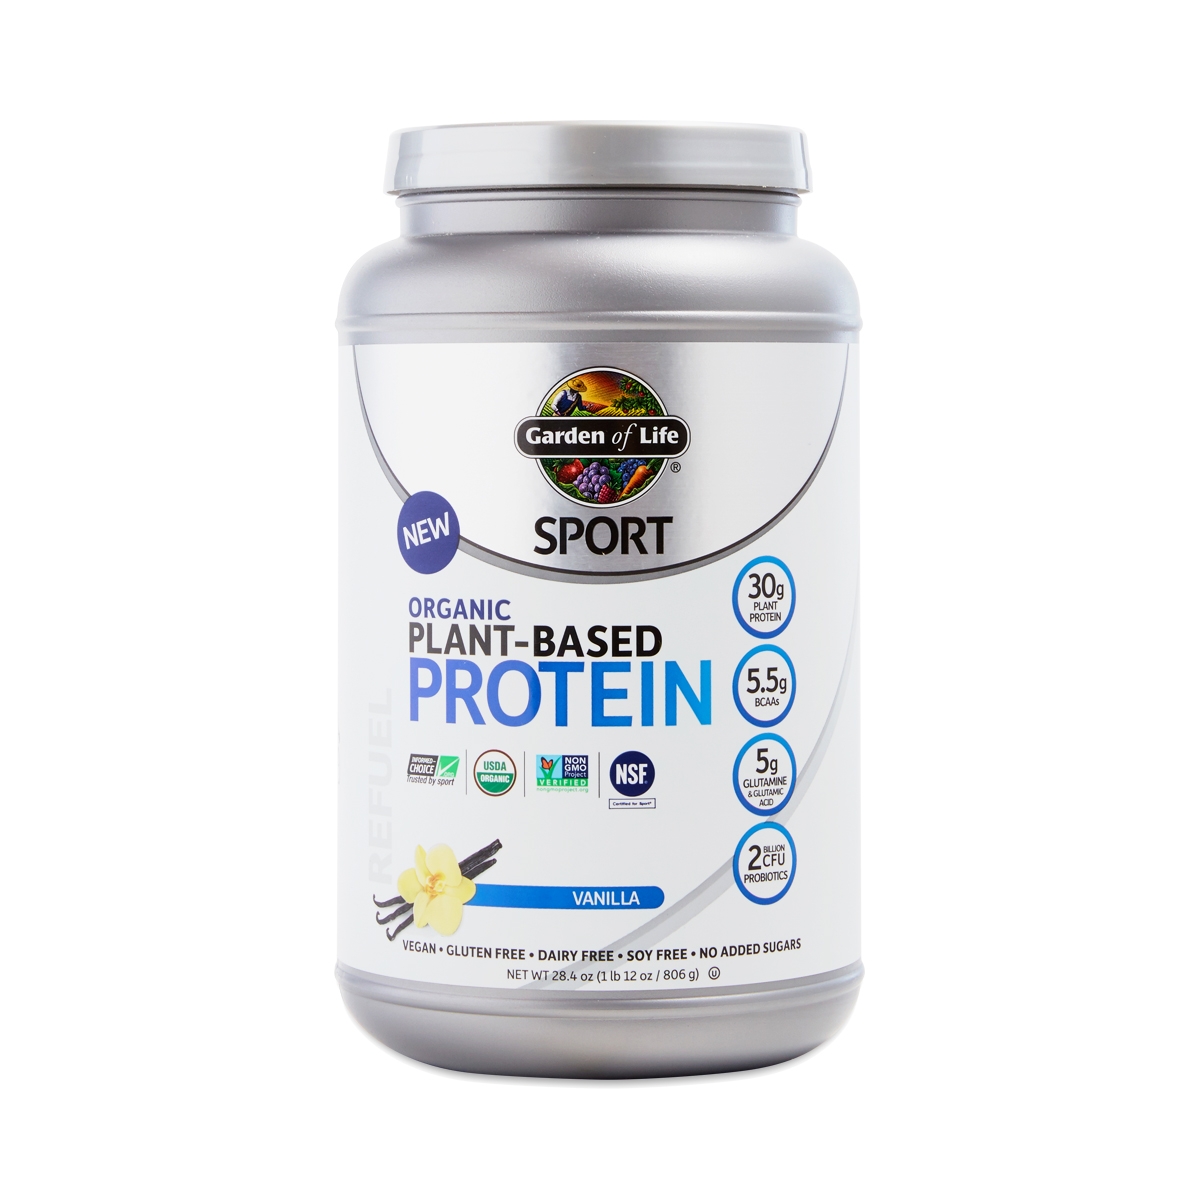 Garden of Life SPORT Organic Plant-Based Protein, Vanilla 28.4 oz container